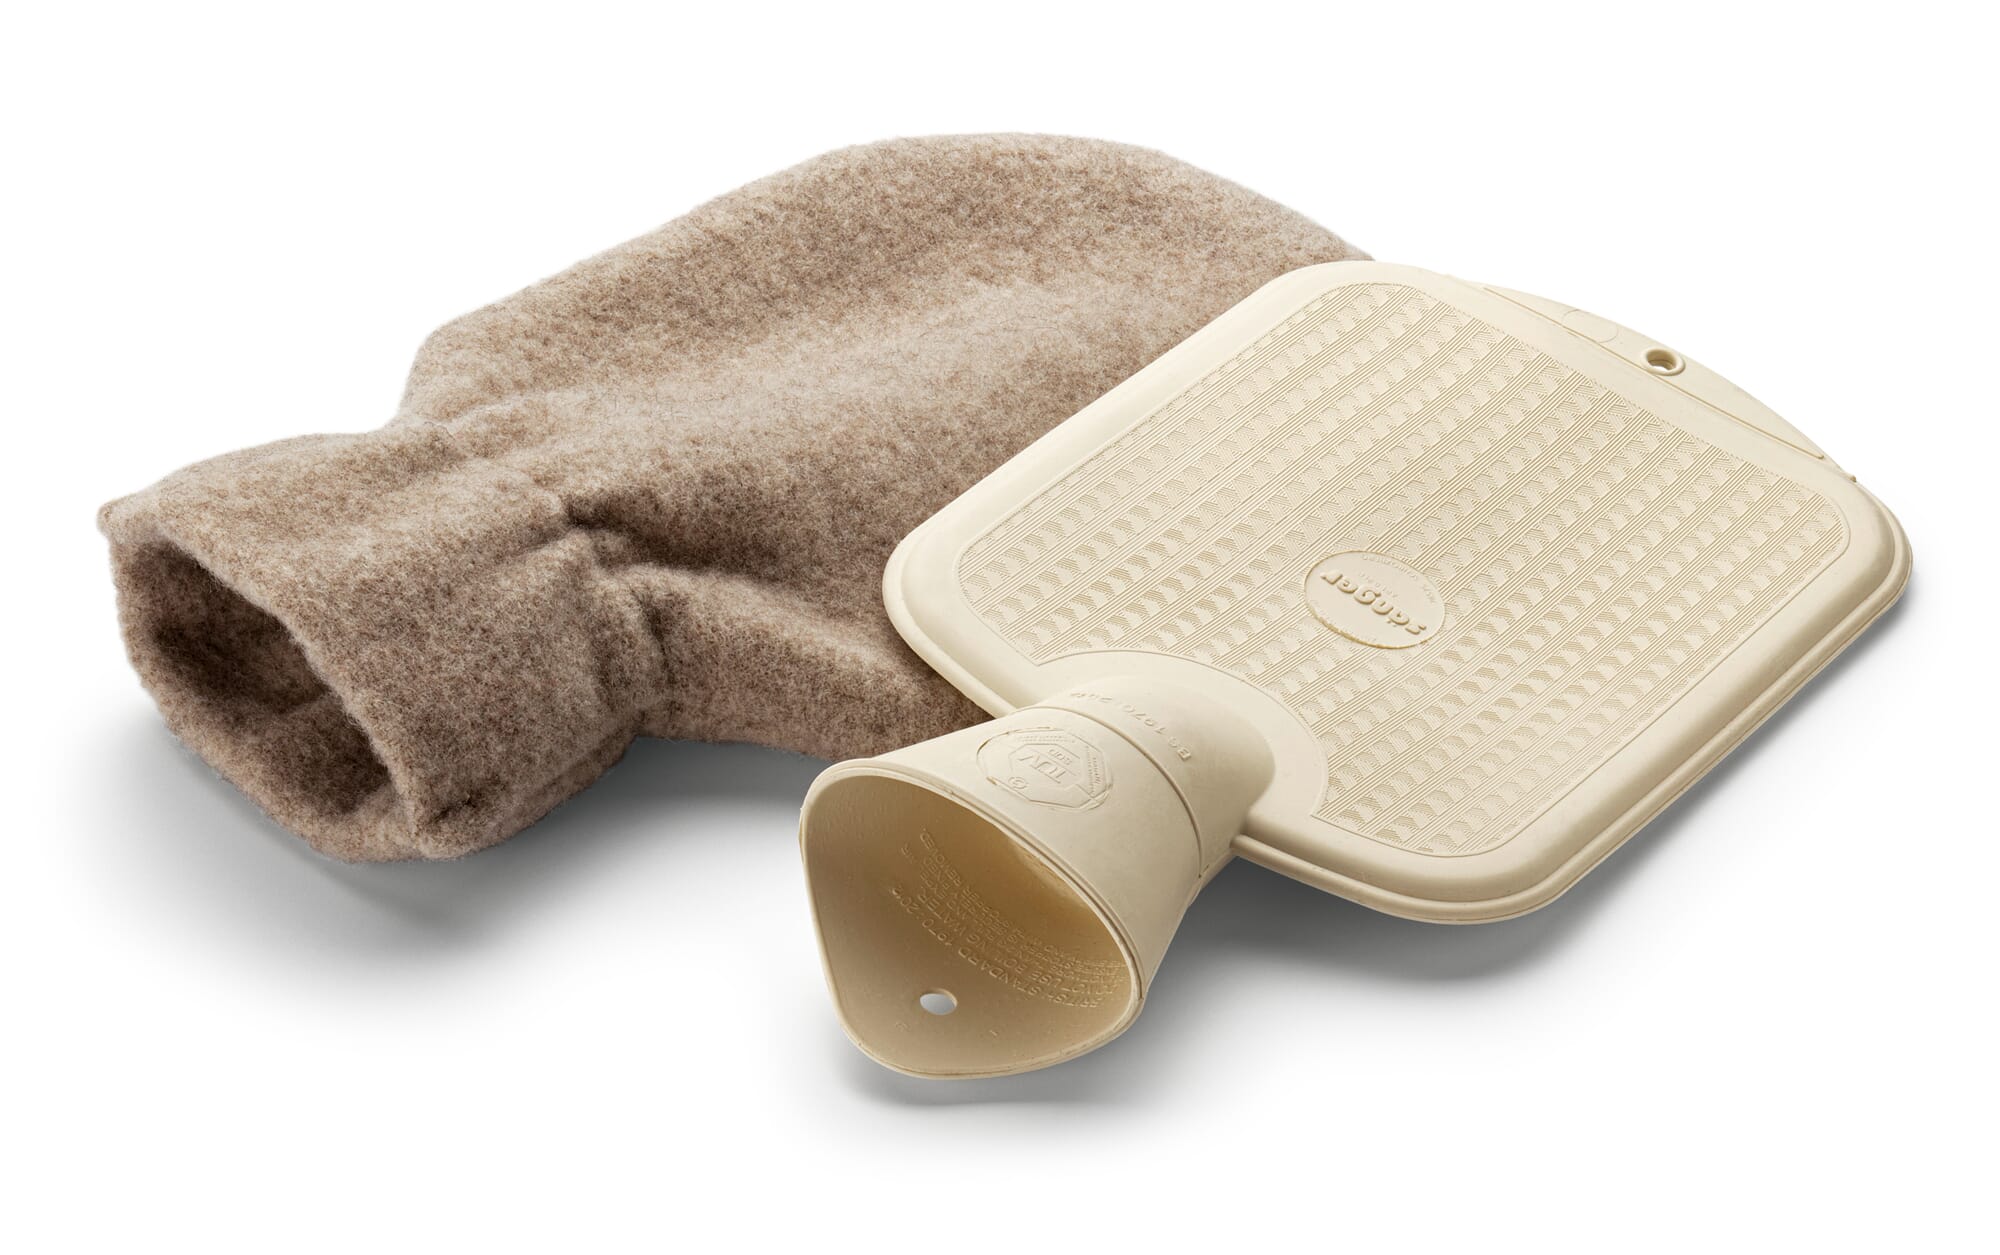 Hot water bottle with merino wool cover, Nature